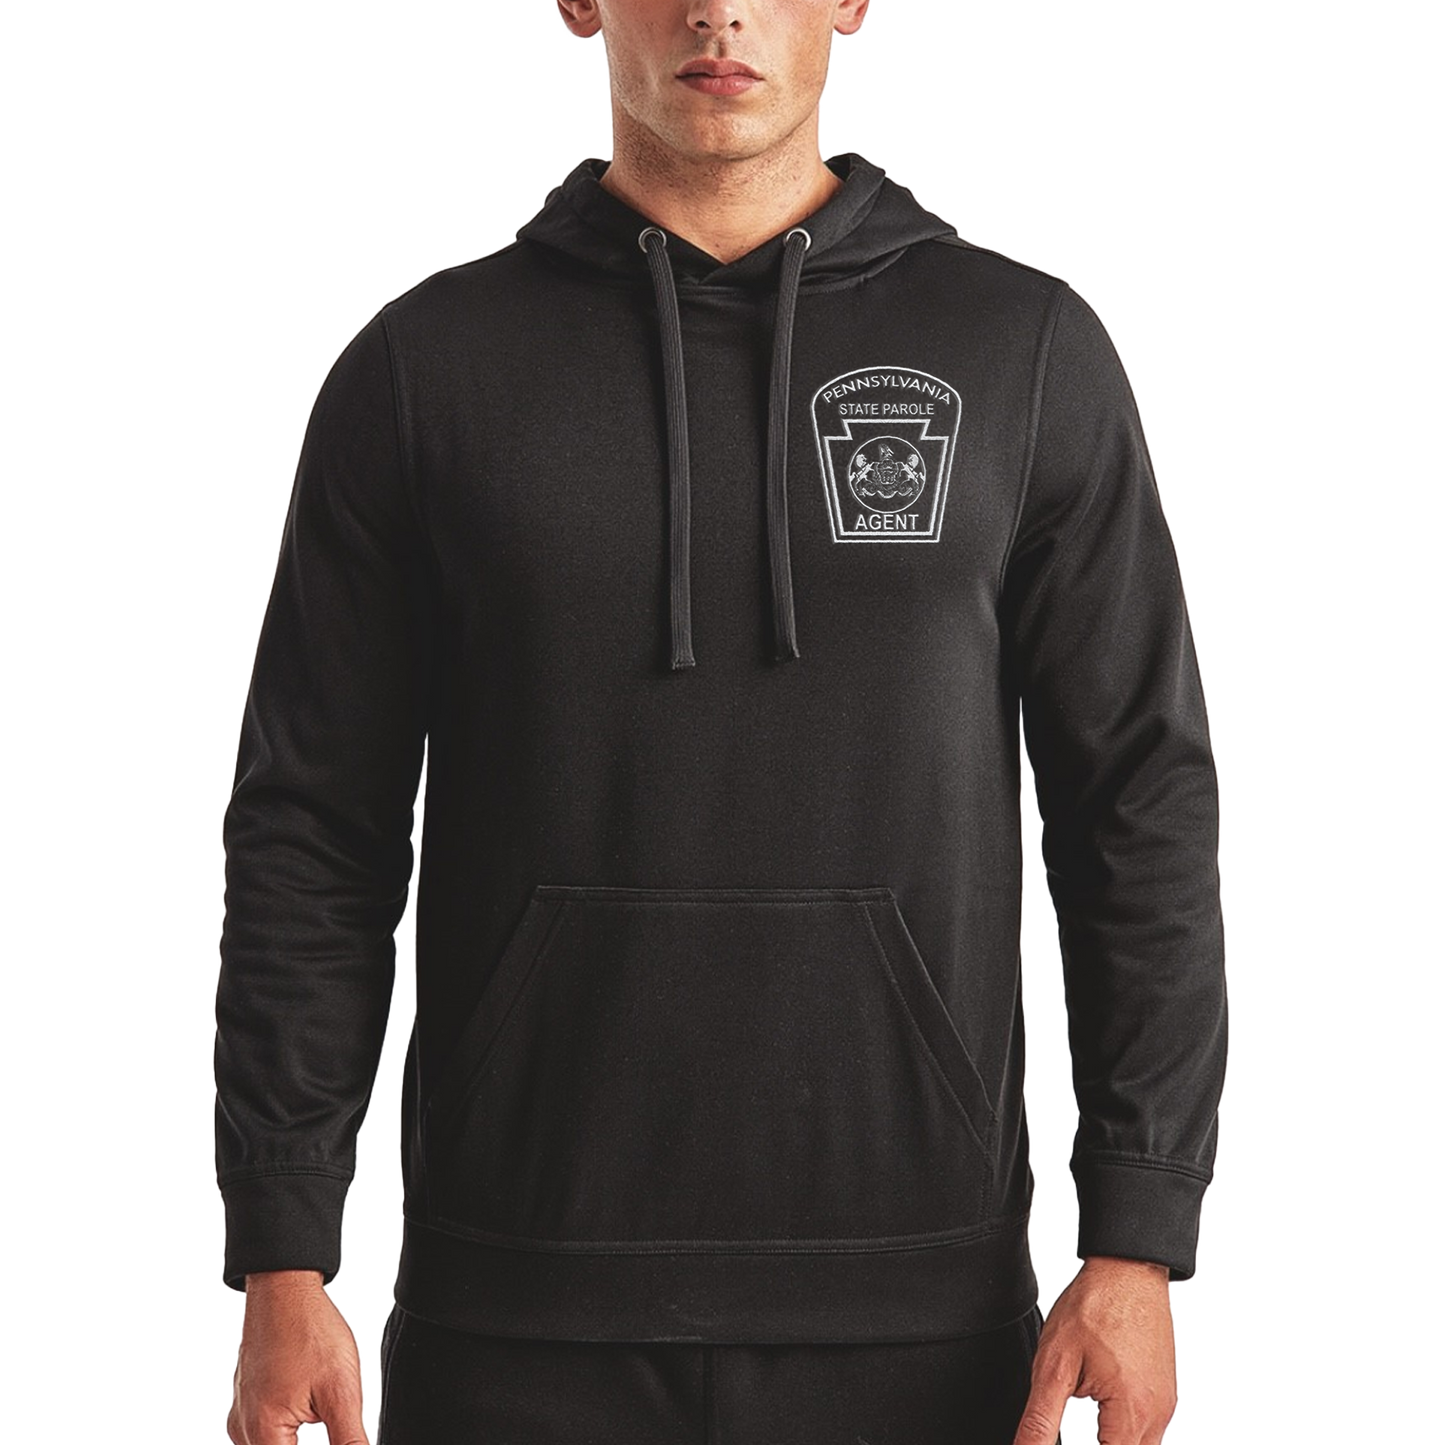 Performance Hooded Sweatshirt with Embroidered State Parole Agent Logos (Various Colors)